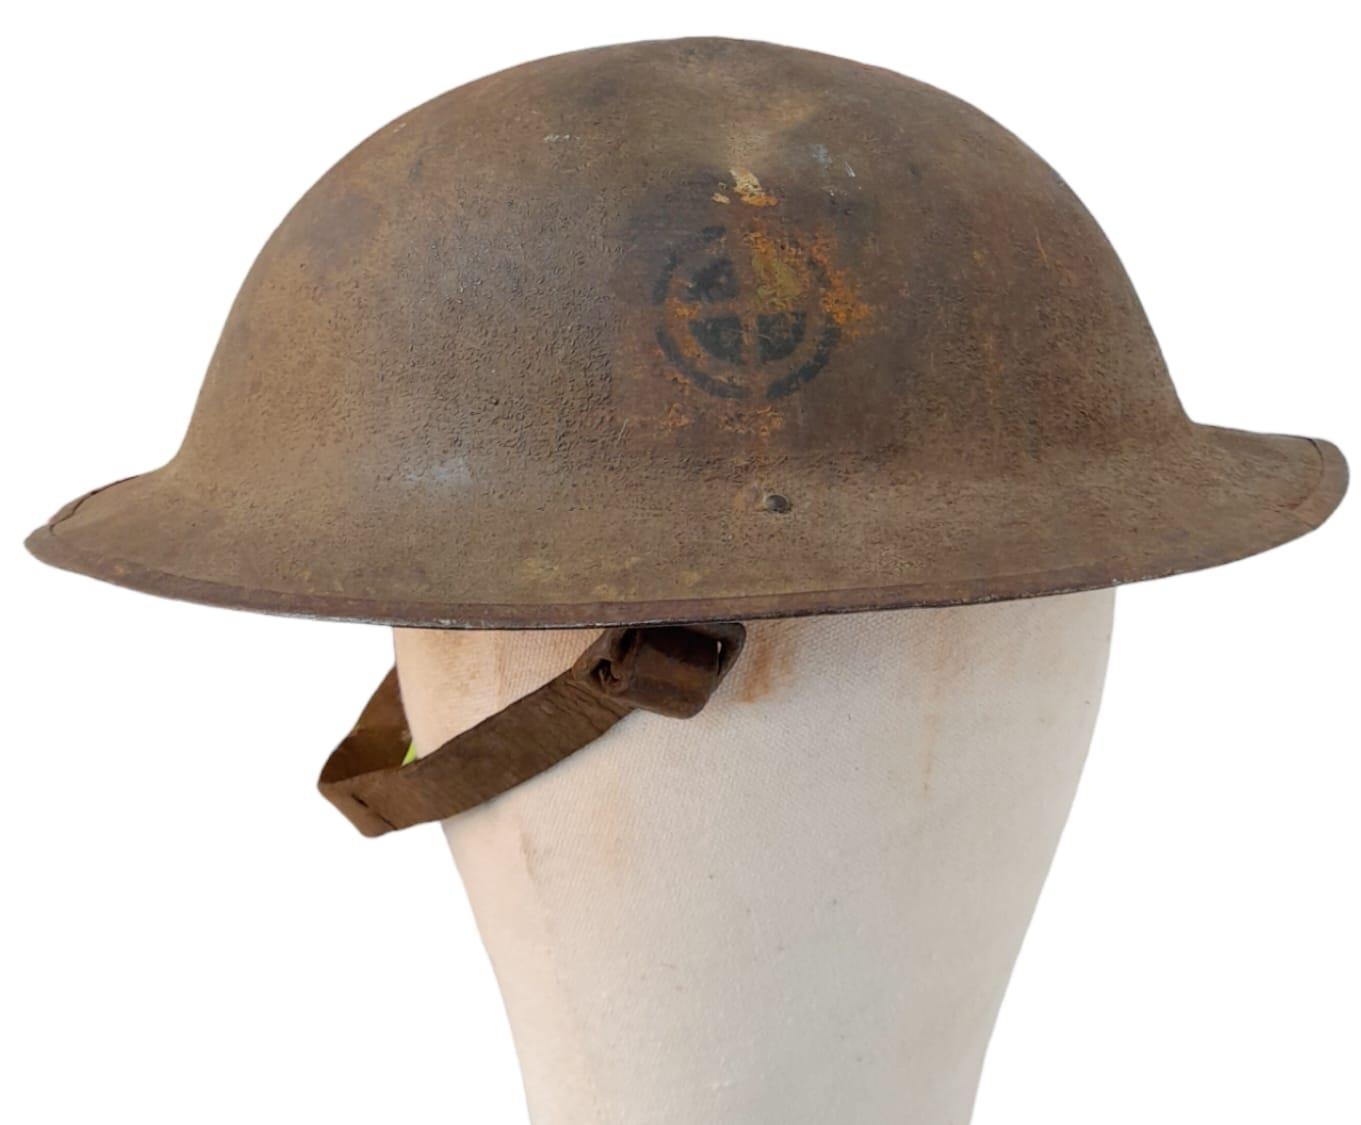 WW1 US 35th Division Brodie Helmet with Chinstrap and Liner. Found in a cellar of a French House